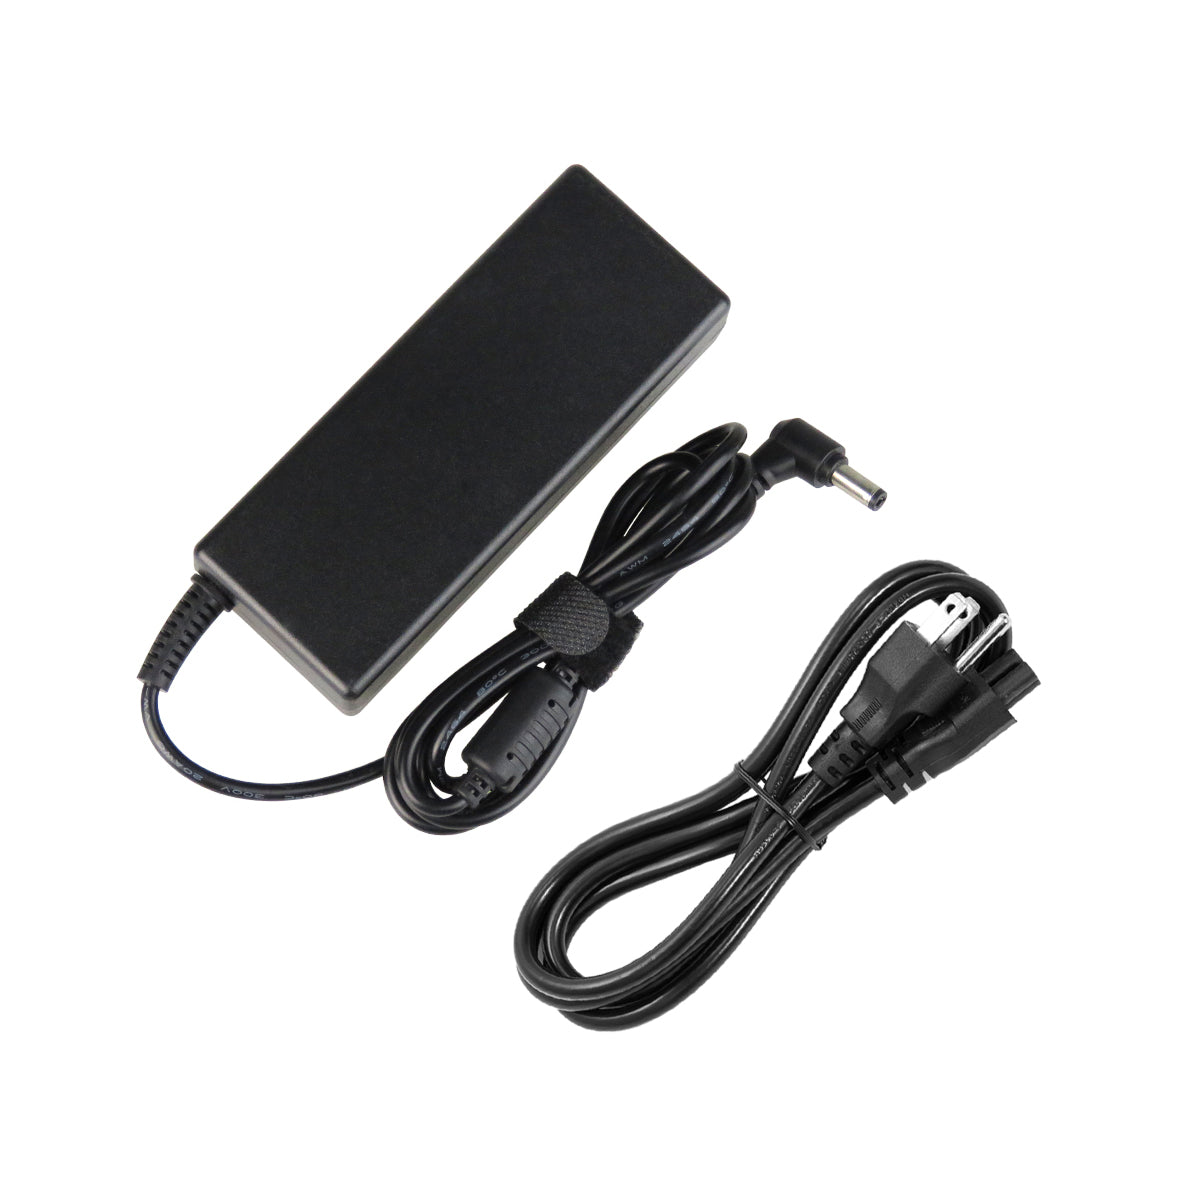 AC Adapter Charger for Gateway MX8738 Notebook.